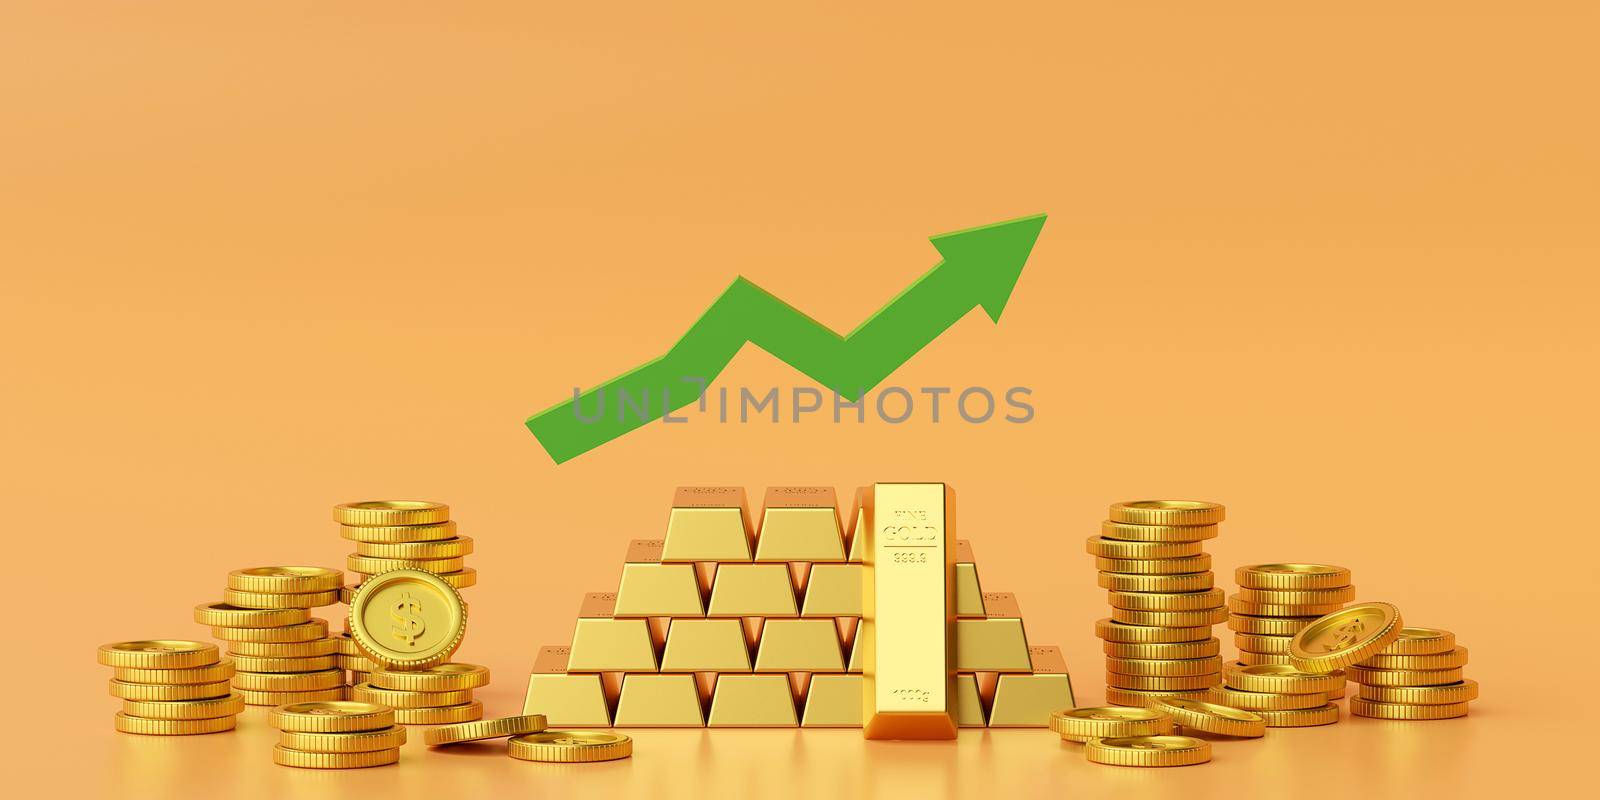 Gold bar with arrow rise up, Banner background with copy space, 3d rendering